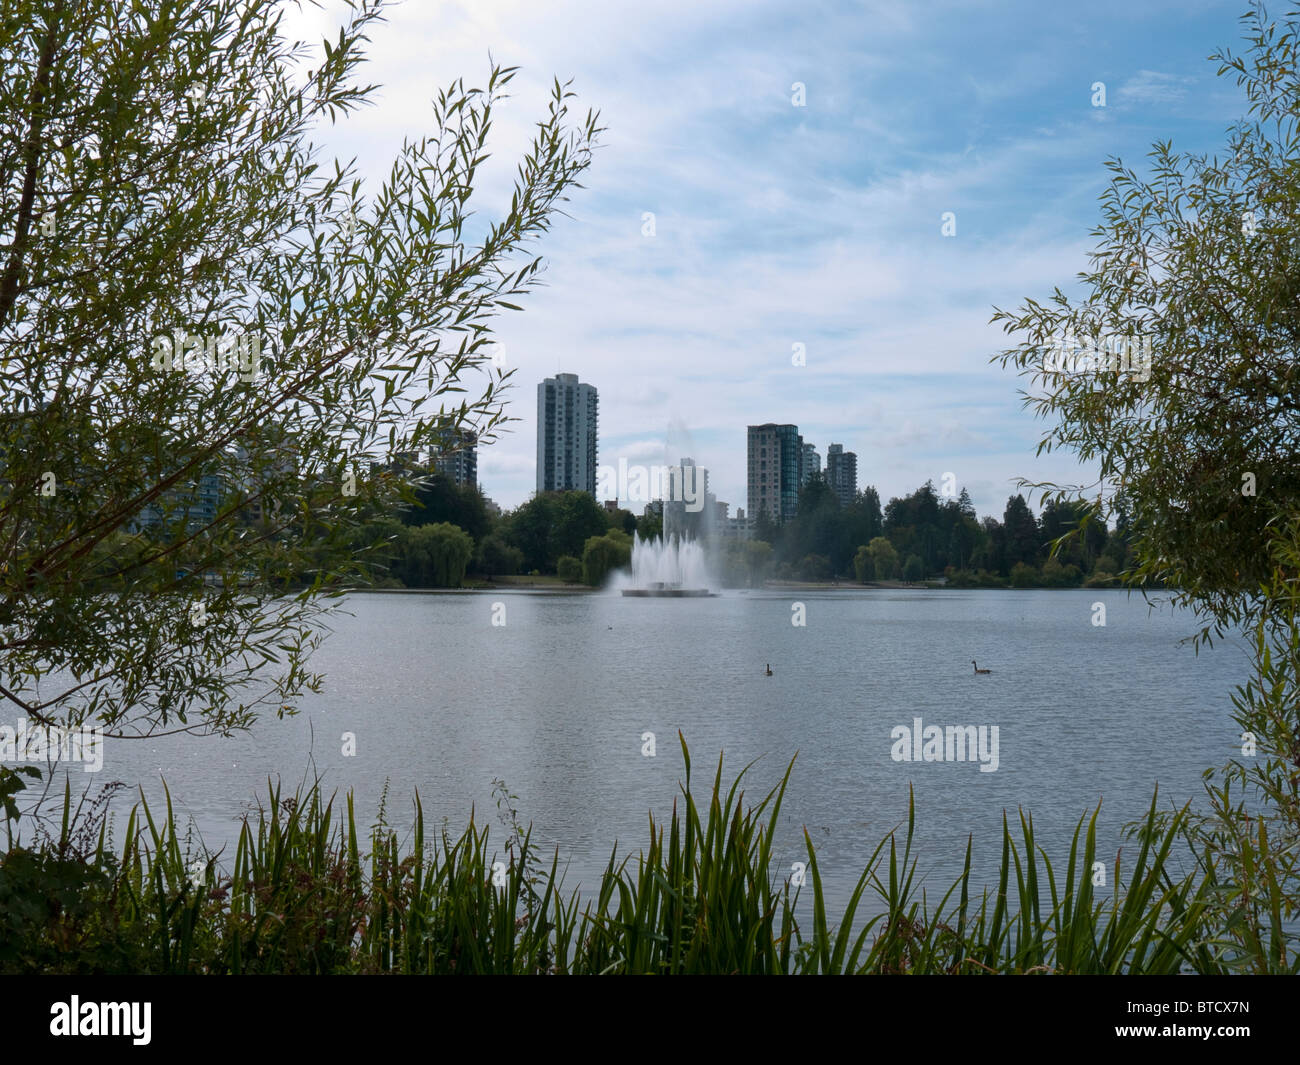 Lost Lagoon, Stanley Park, Vancouver, British Columbia, Canada September 2010 Stock Photo